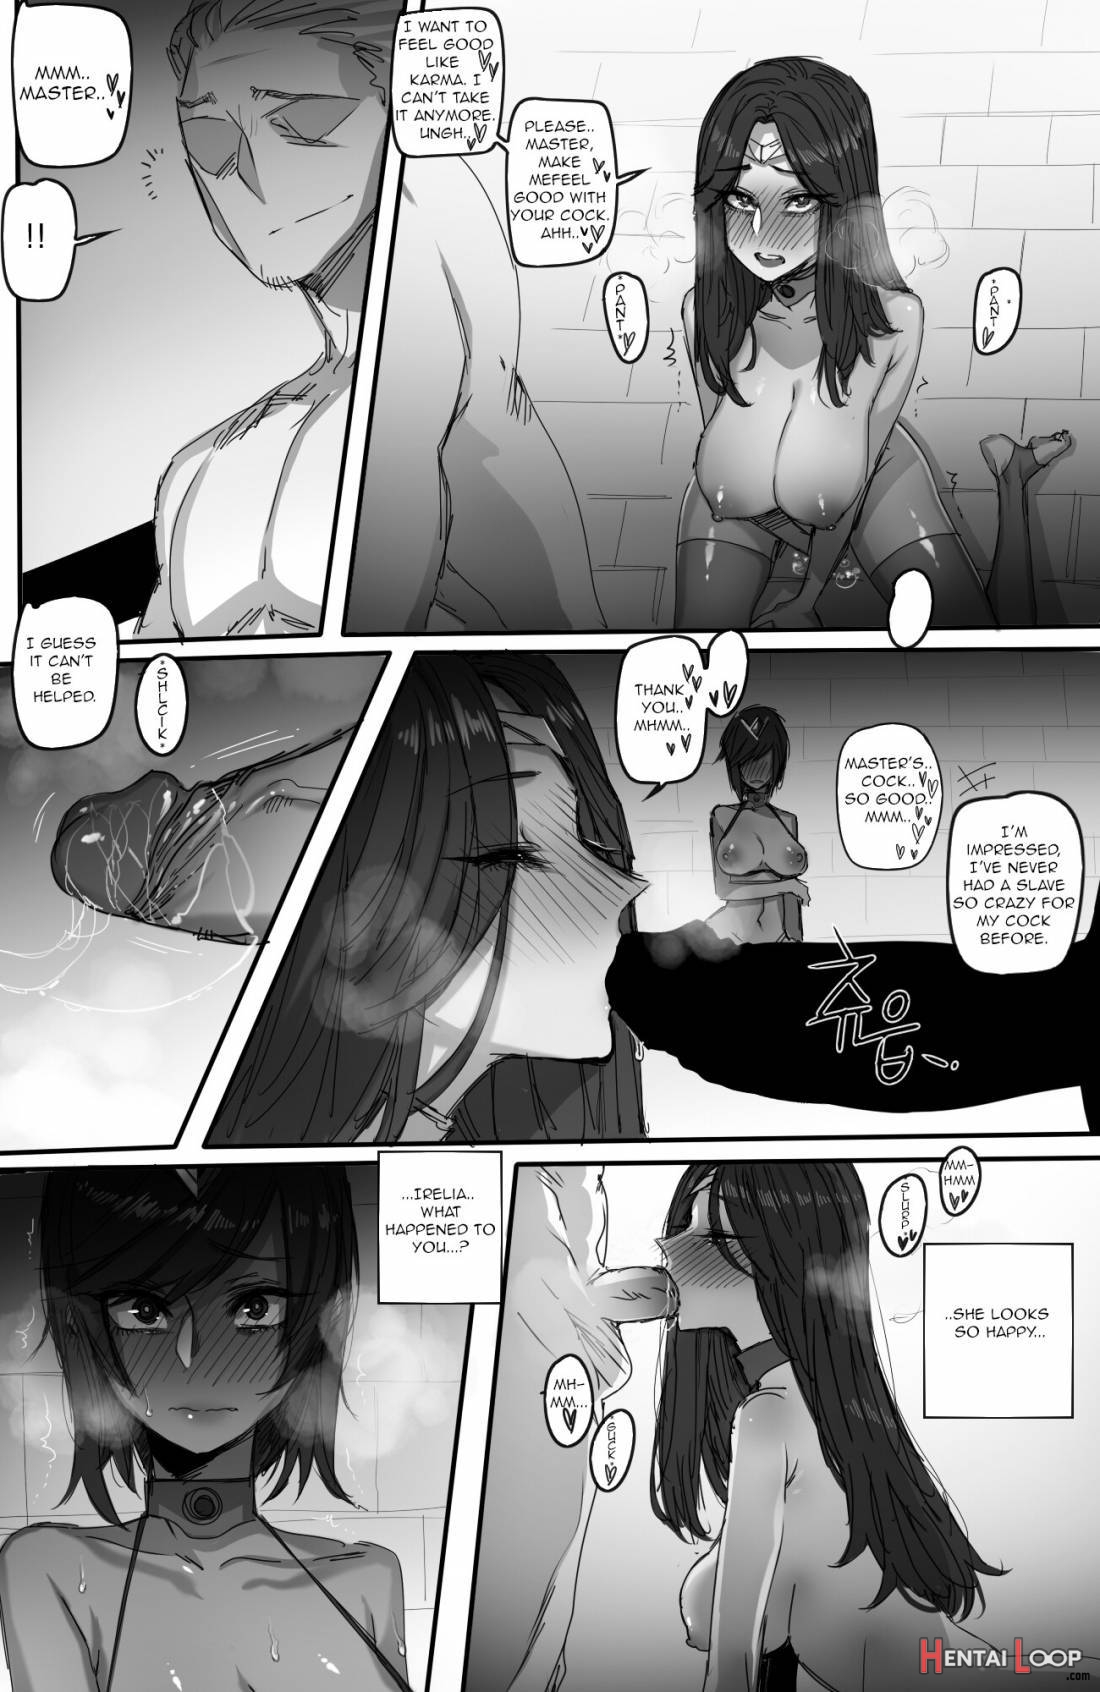 For the Noxus page 13